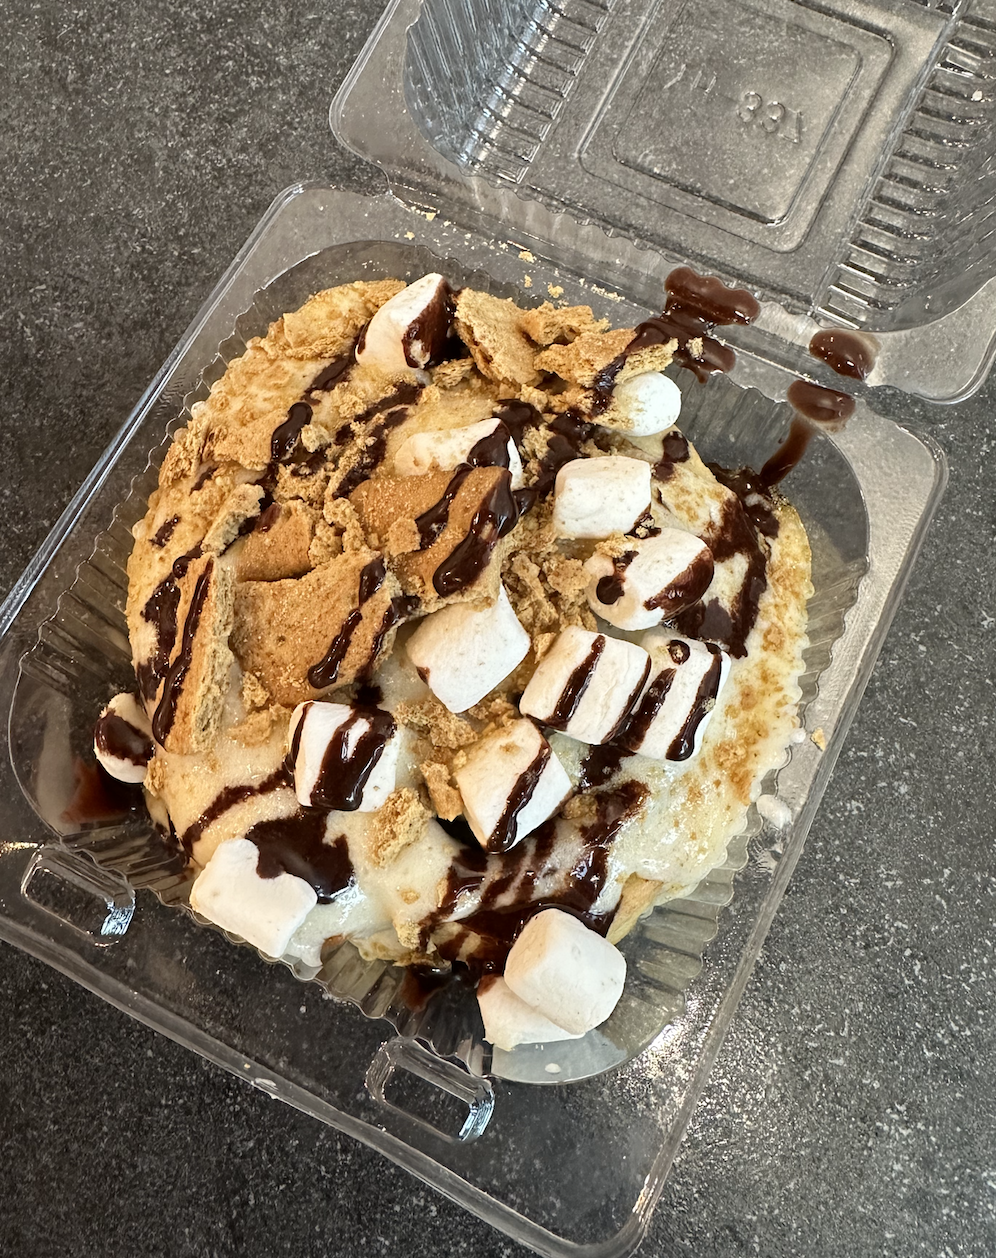    Campfire S;mores - Marshmallow frosting topped with graham cookies, marshmallows &amp; chocolate sauce.   I ate it all in one sitting! The marshmallows were most enjoyable. 